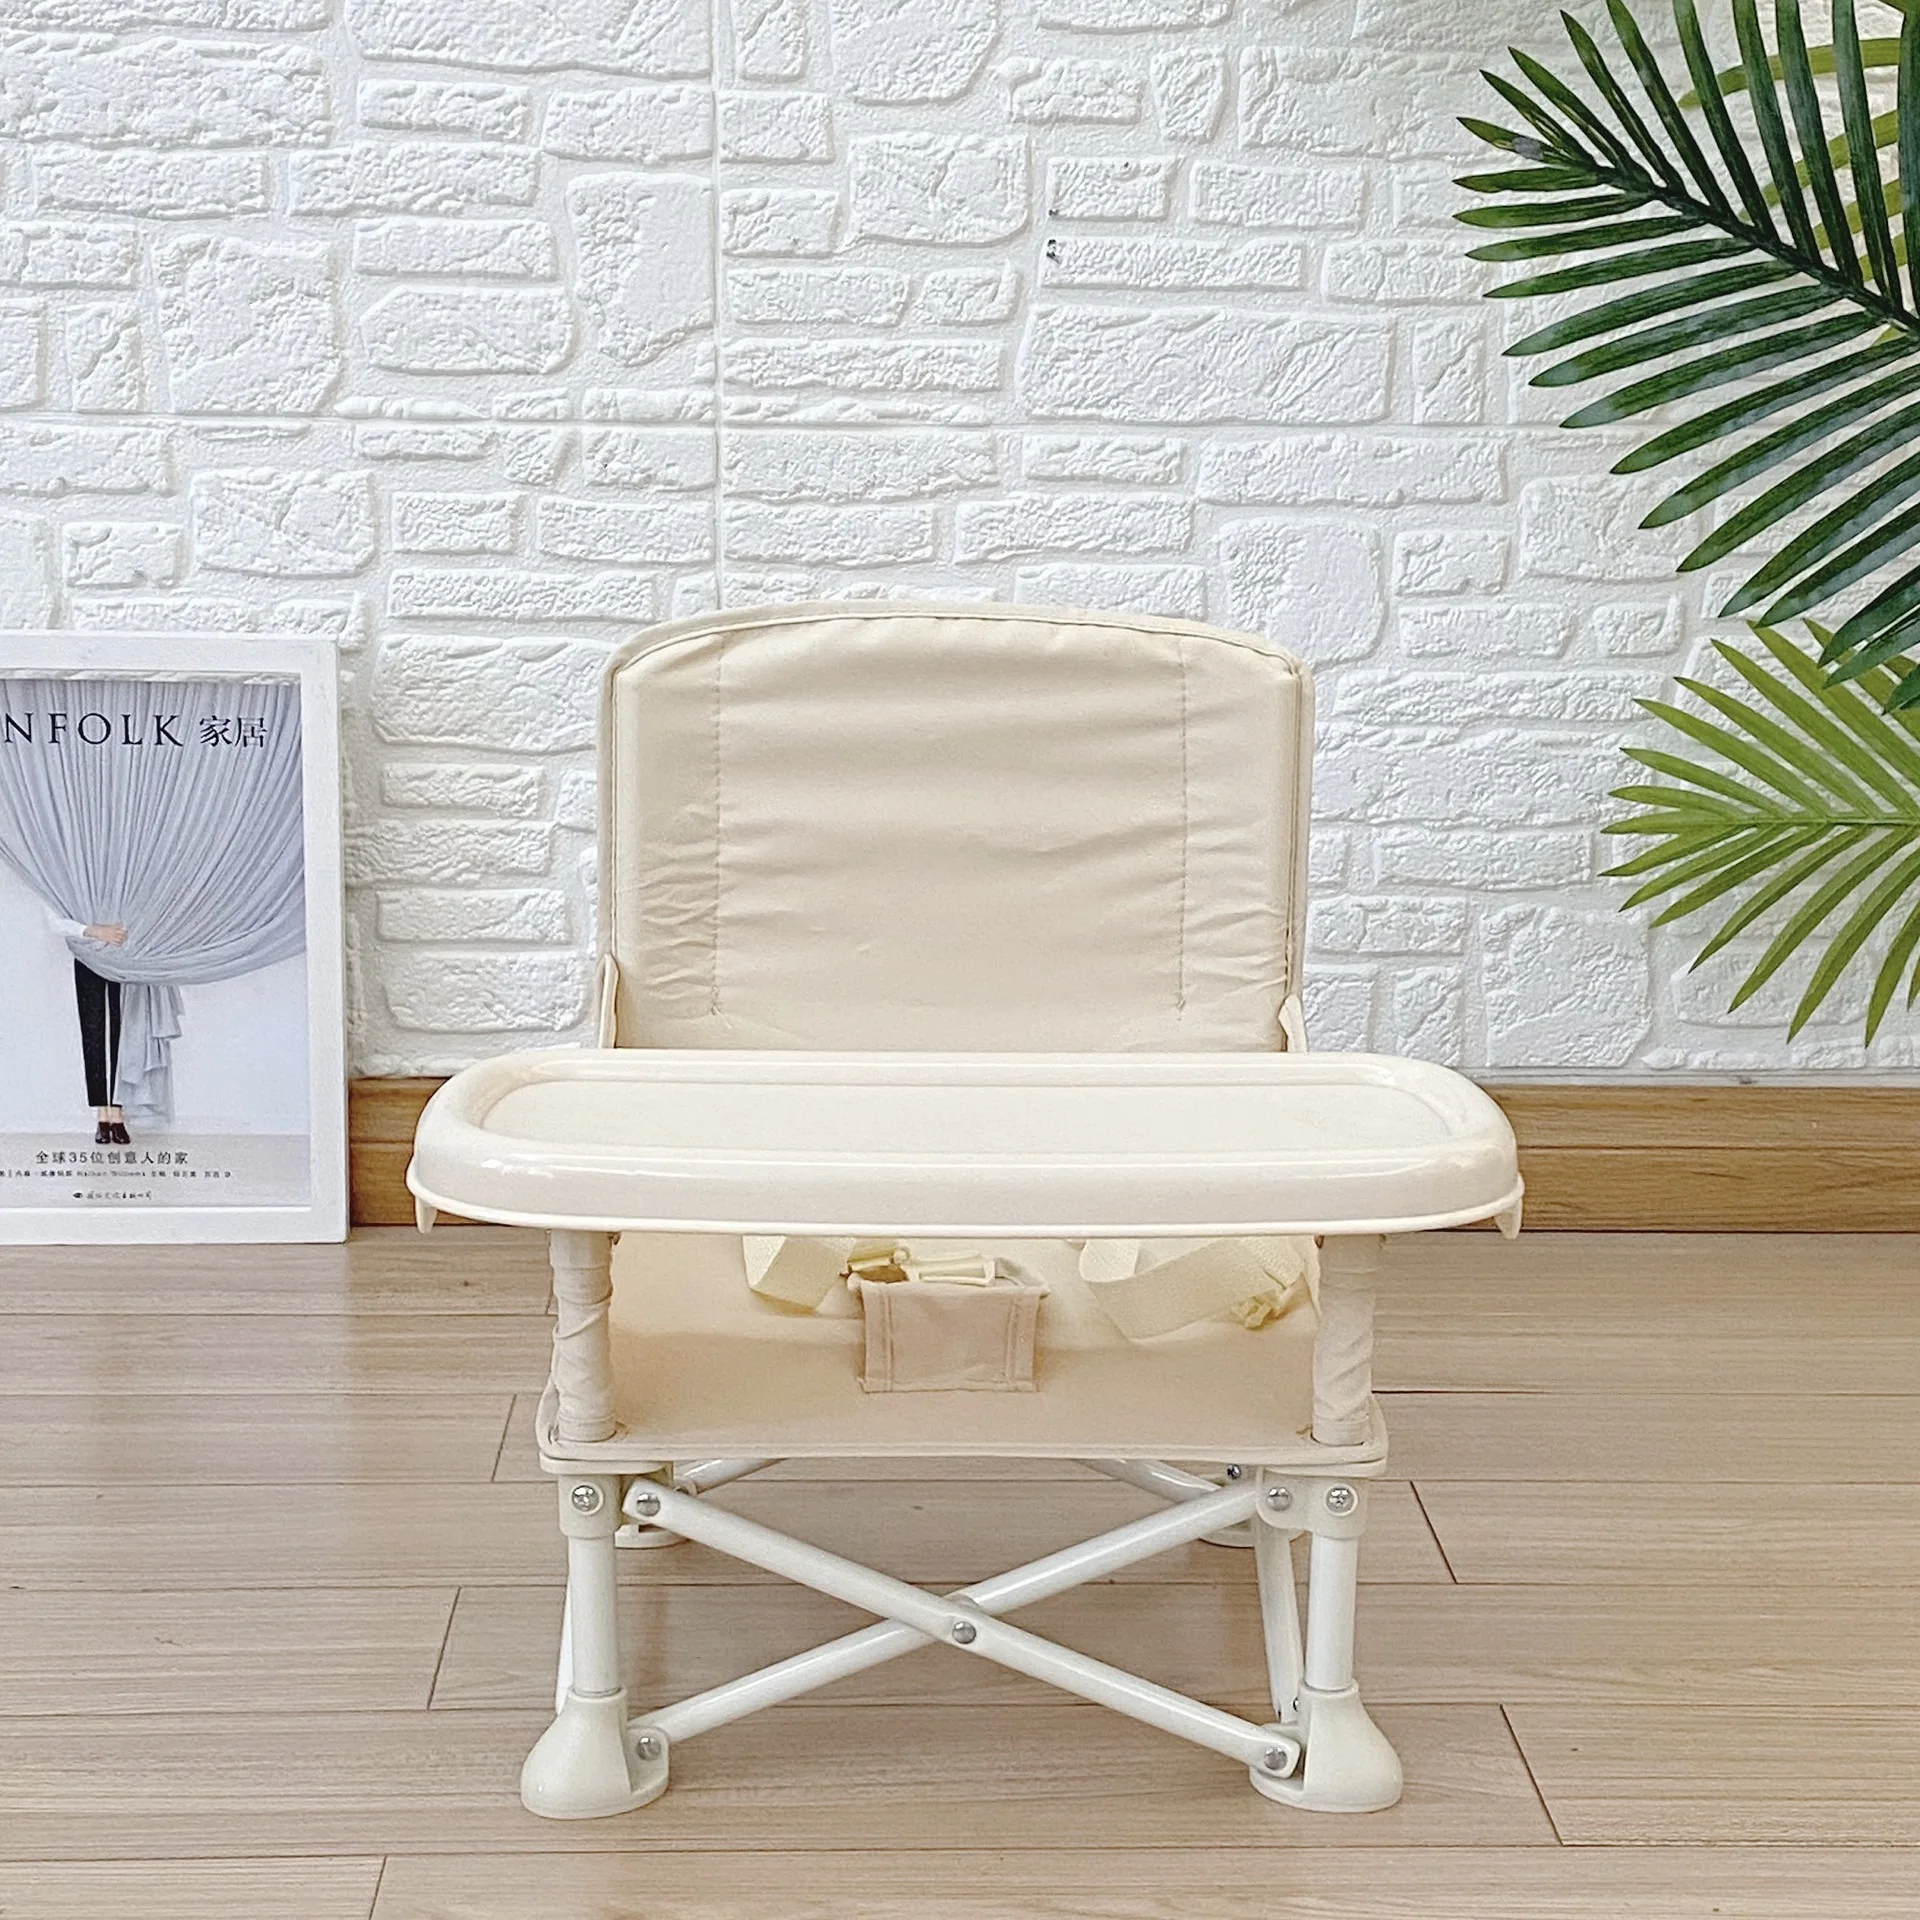 Newborn Photography Props Dining Chair Baby Portable Folding Chair Multi-function Baby Chair Studio Photography Accessories